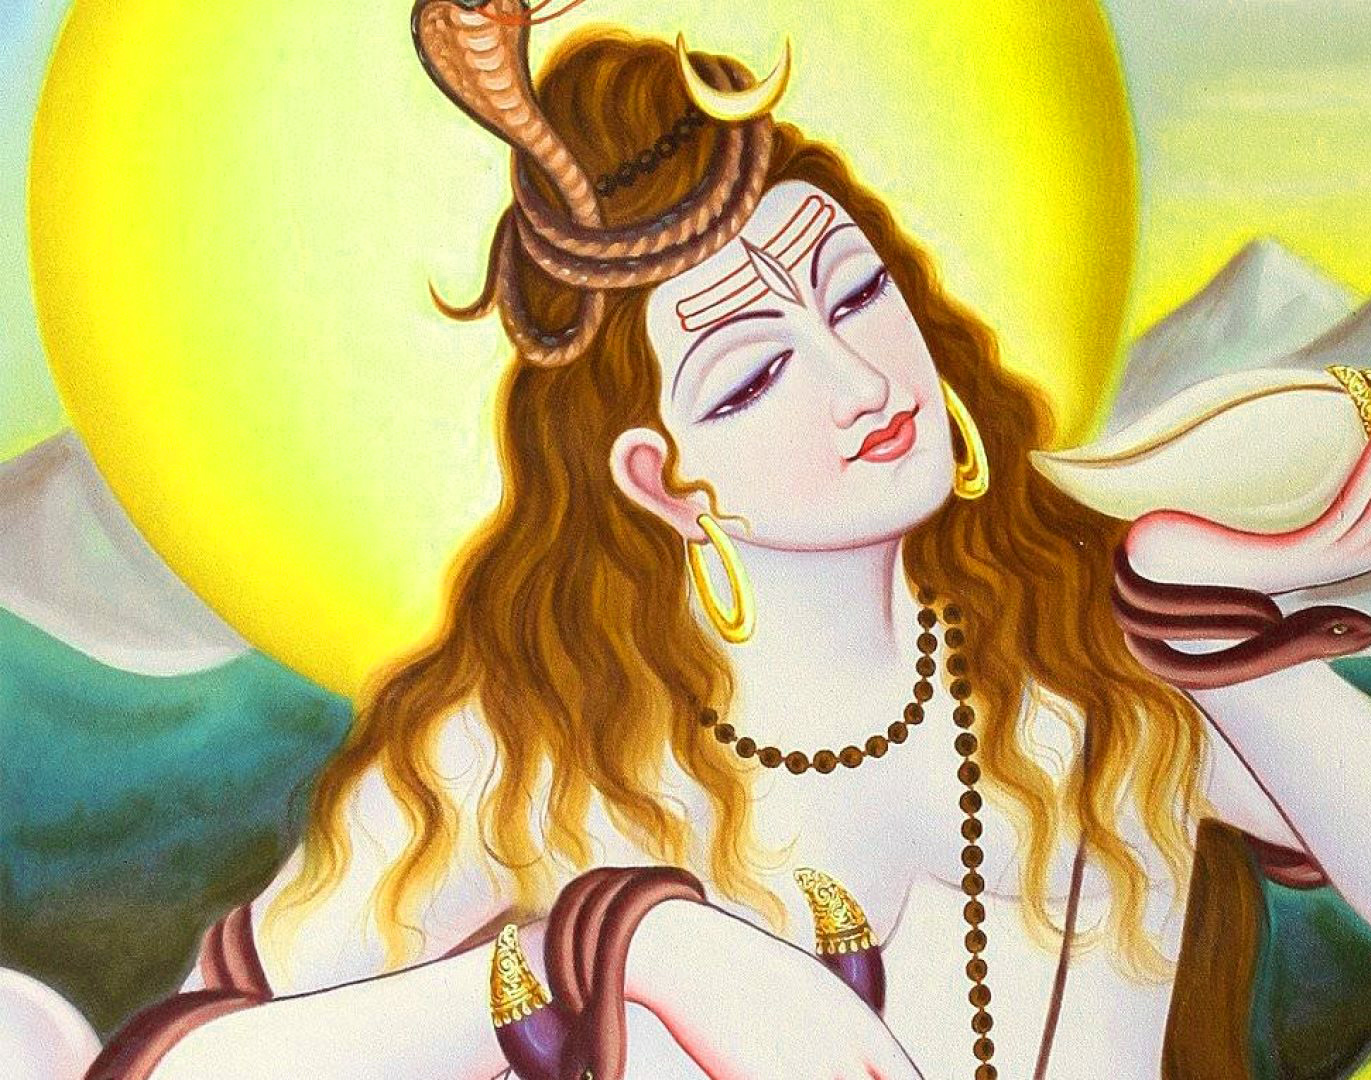 Free 1080p Lord Shiva Images Wallpaper